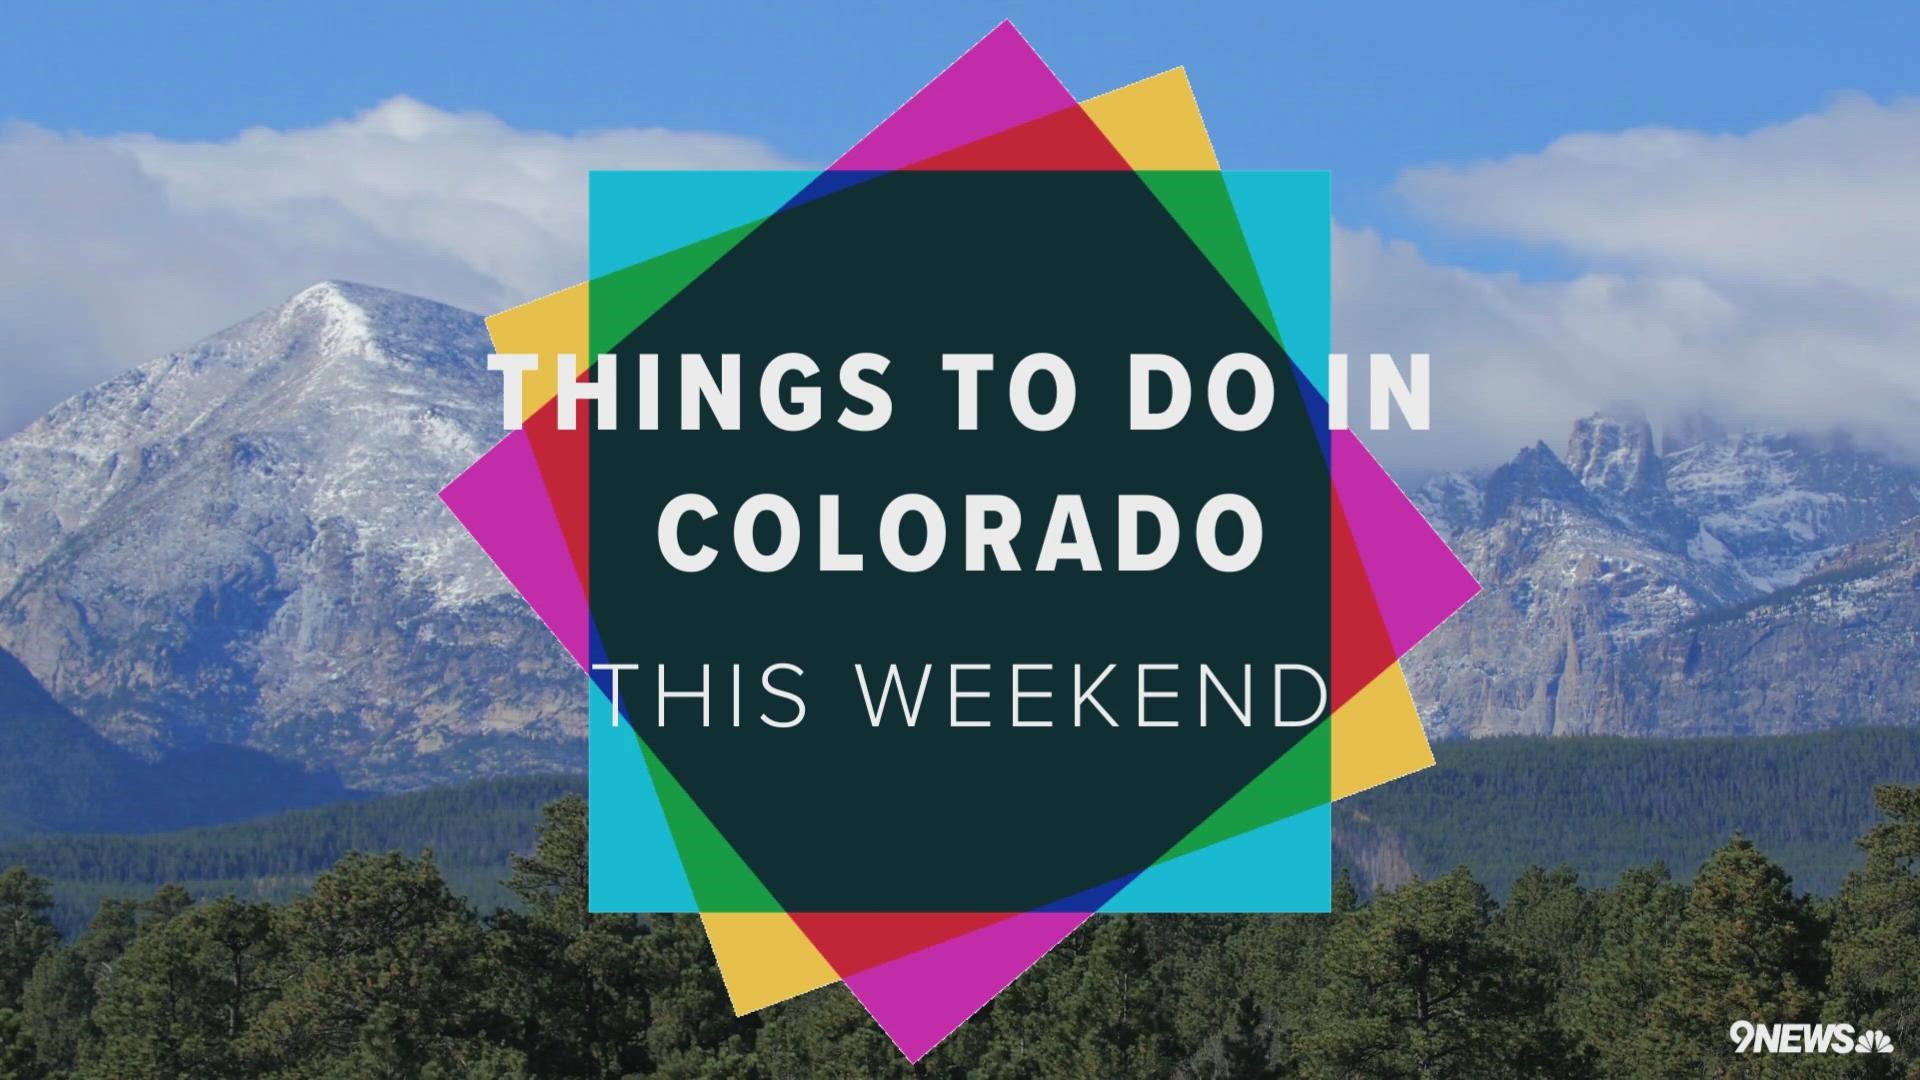 With holiday lightings, fairs, Christmas shows, Trans-Siberian Orchestra and Pentatonix, there's so much to do in Colorado this weekend.